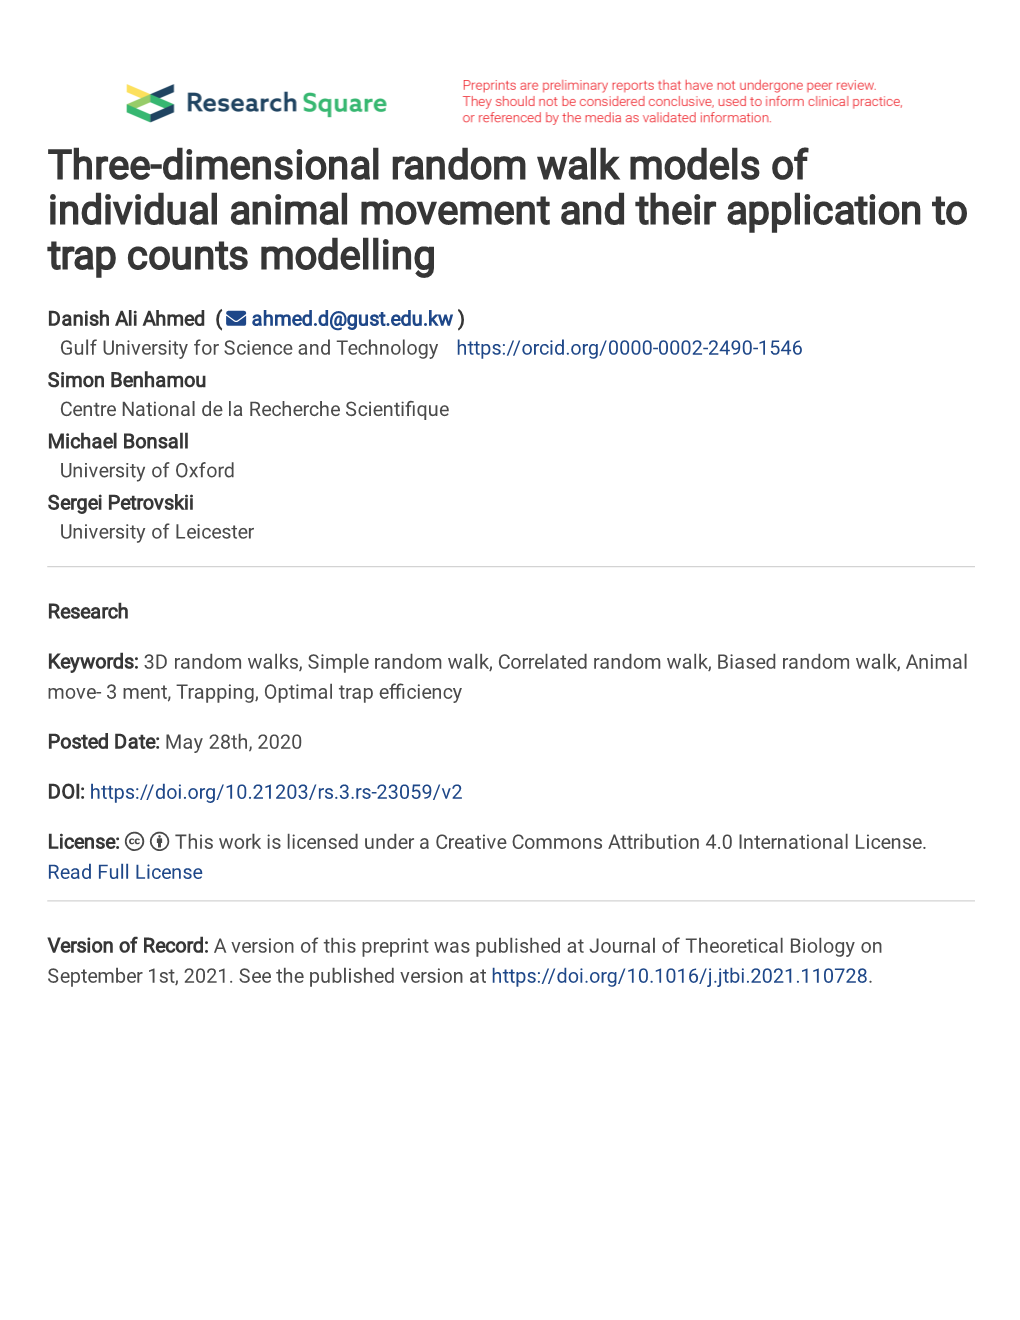 Three-Dimensional Random Walk Models of Individual Animal Movement and Their Application to Trap Counts Modelling